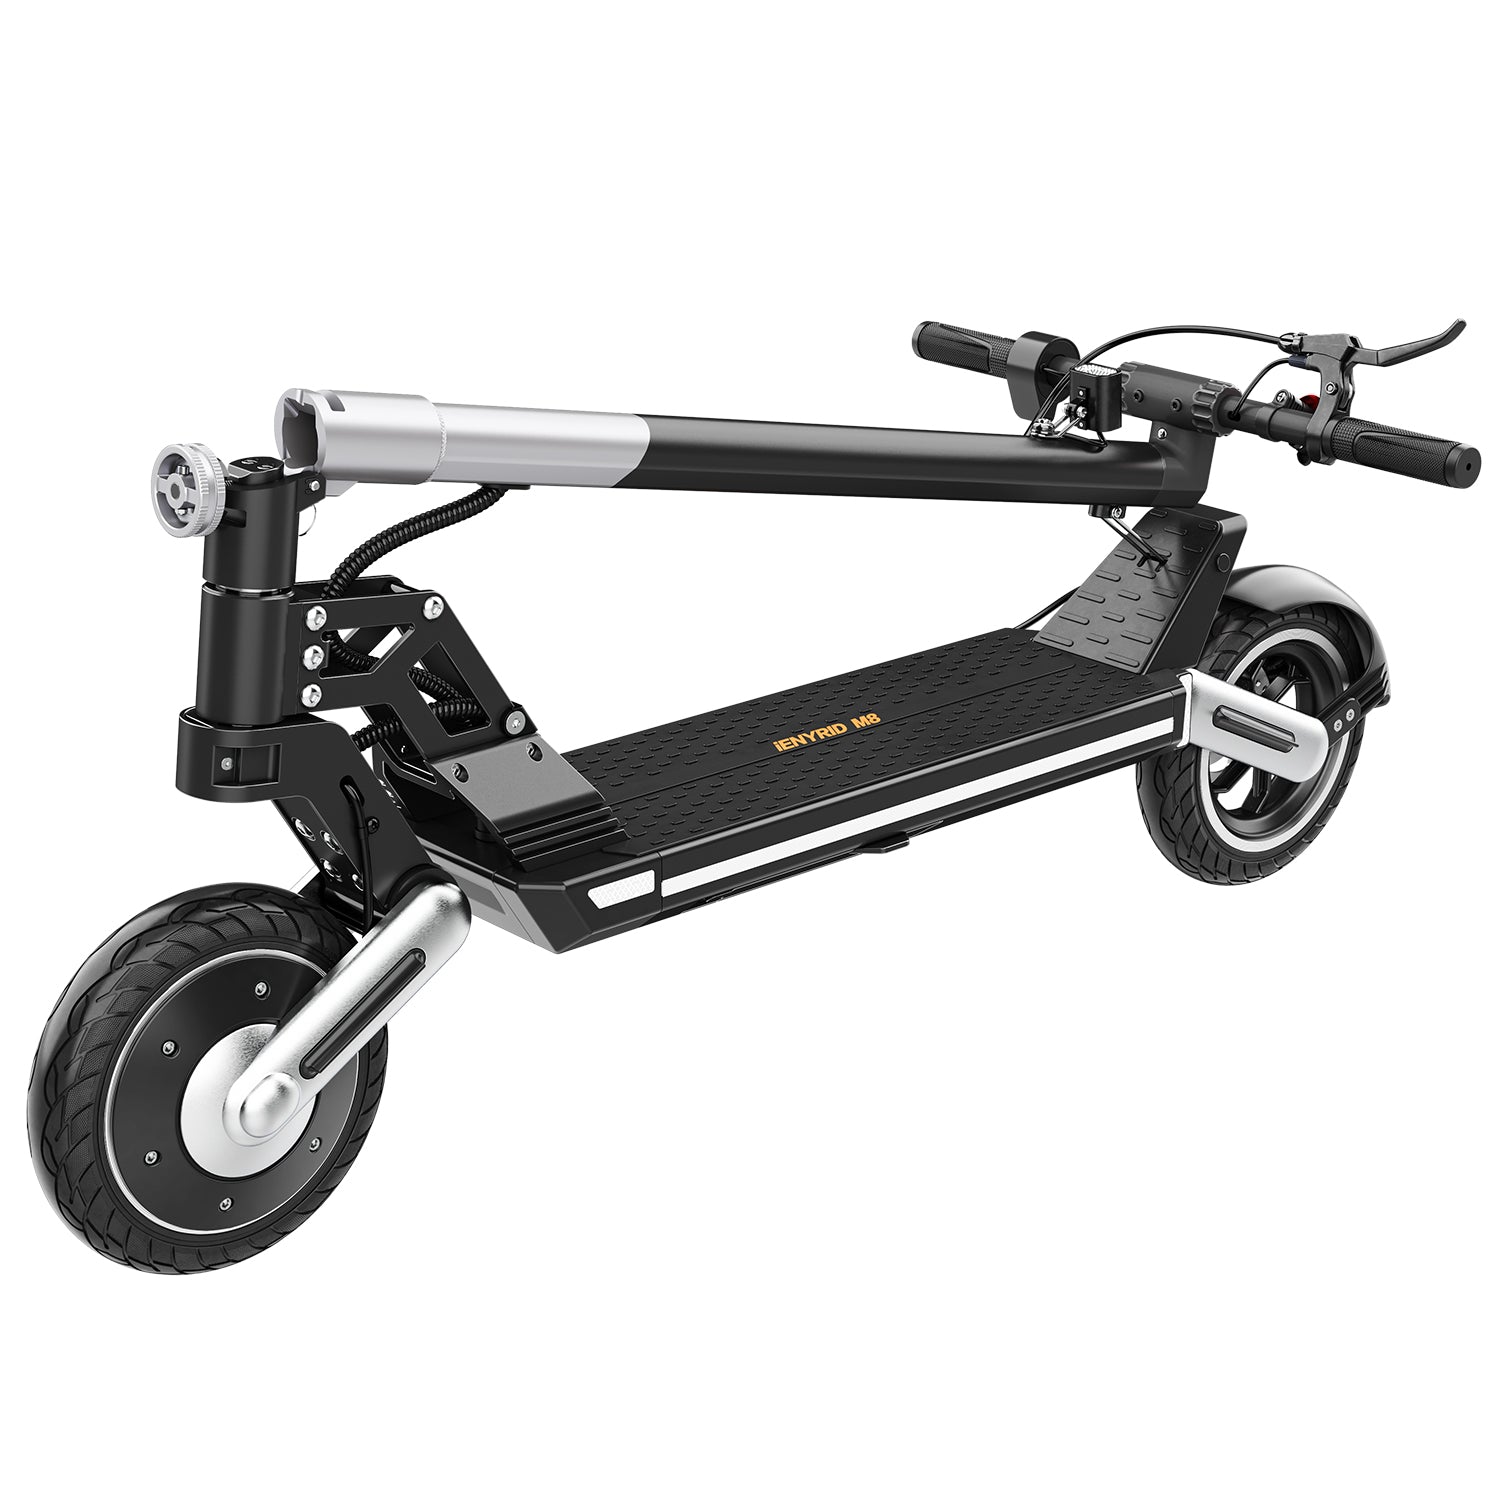 IENYRID M8 500W Motor 10 Inch Off-road Electric Scooter 10Ah Battery